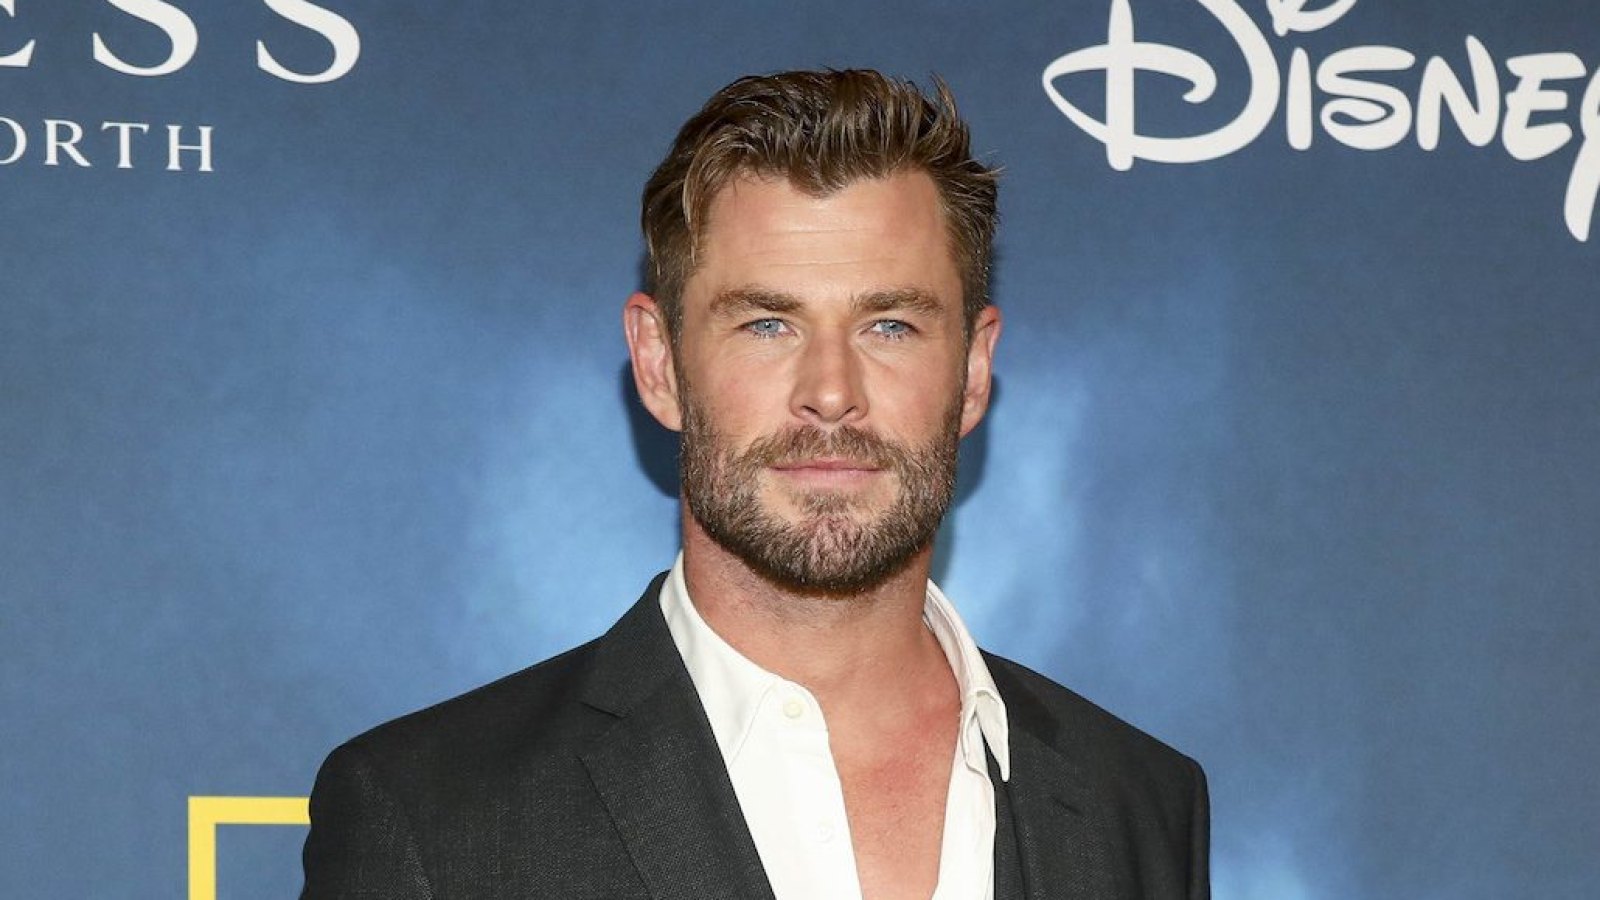 Chris Hemsworth Discovers He Has Predisposition to Alzheimer's